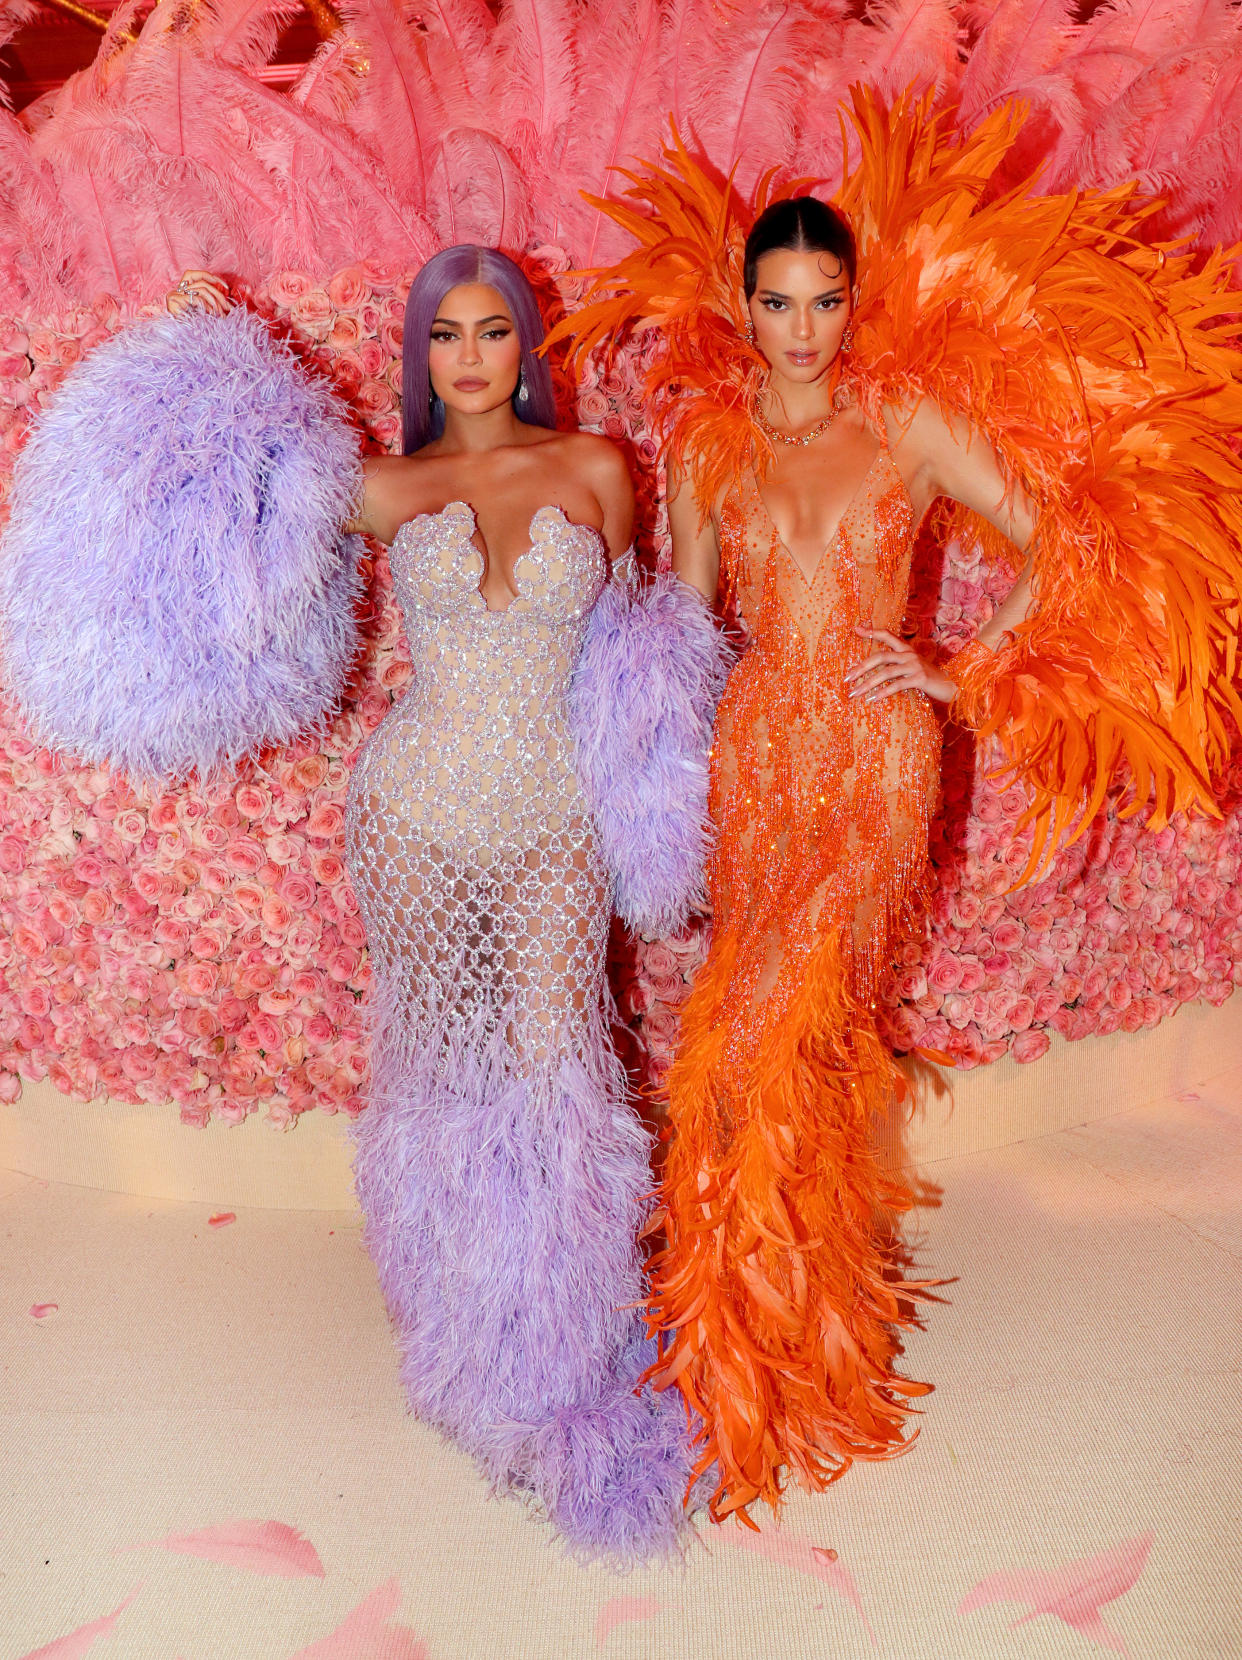 A photo of Kylie Jenner wearing a purple dress and Kendall Jenner wearing an orange dress at the 2019 Met Gala Celebrating Camp: Notes on Fashion at Metropolitan Museum of Art on May 06, 2019 in New York City.